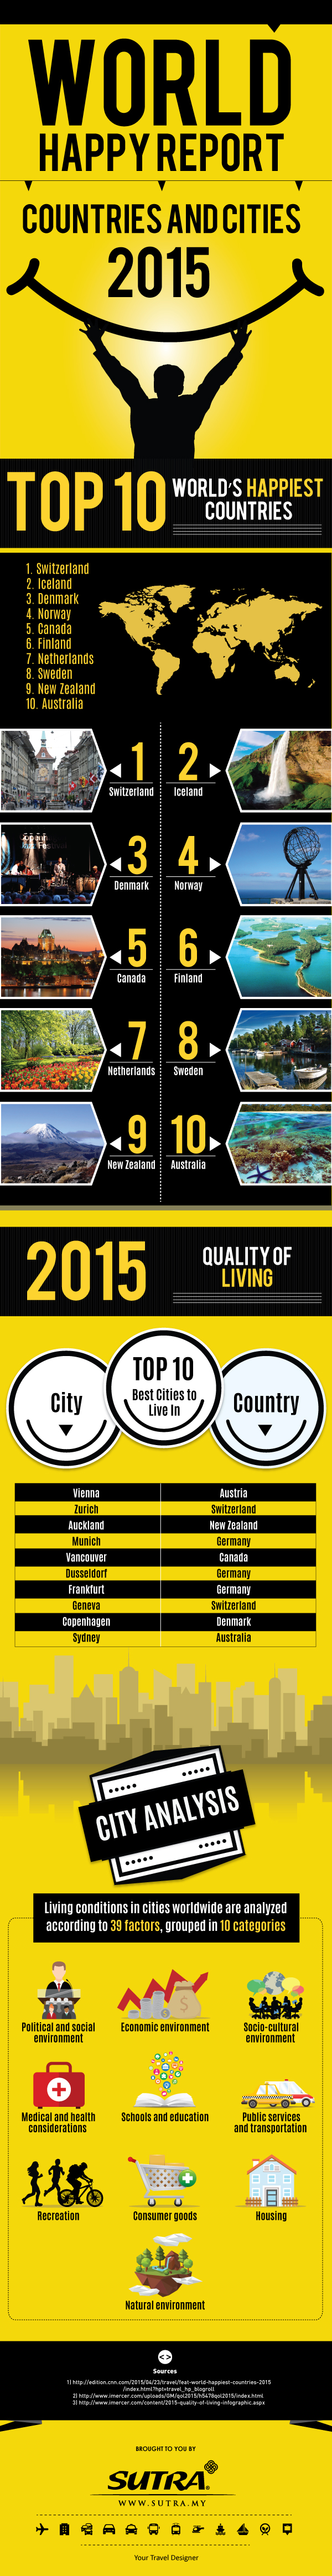 Infographic: World Happy Report - Countries and Cities 2015